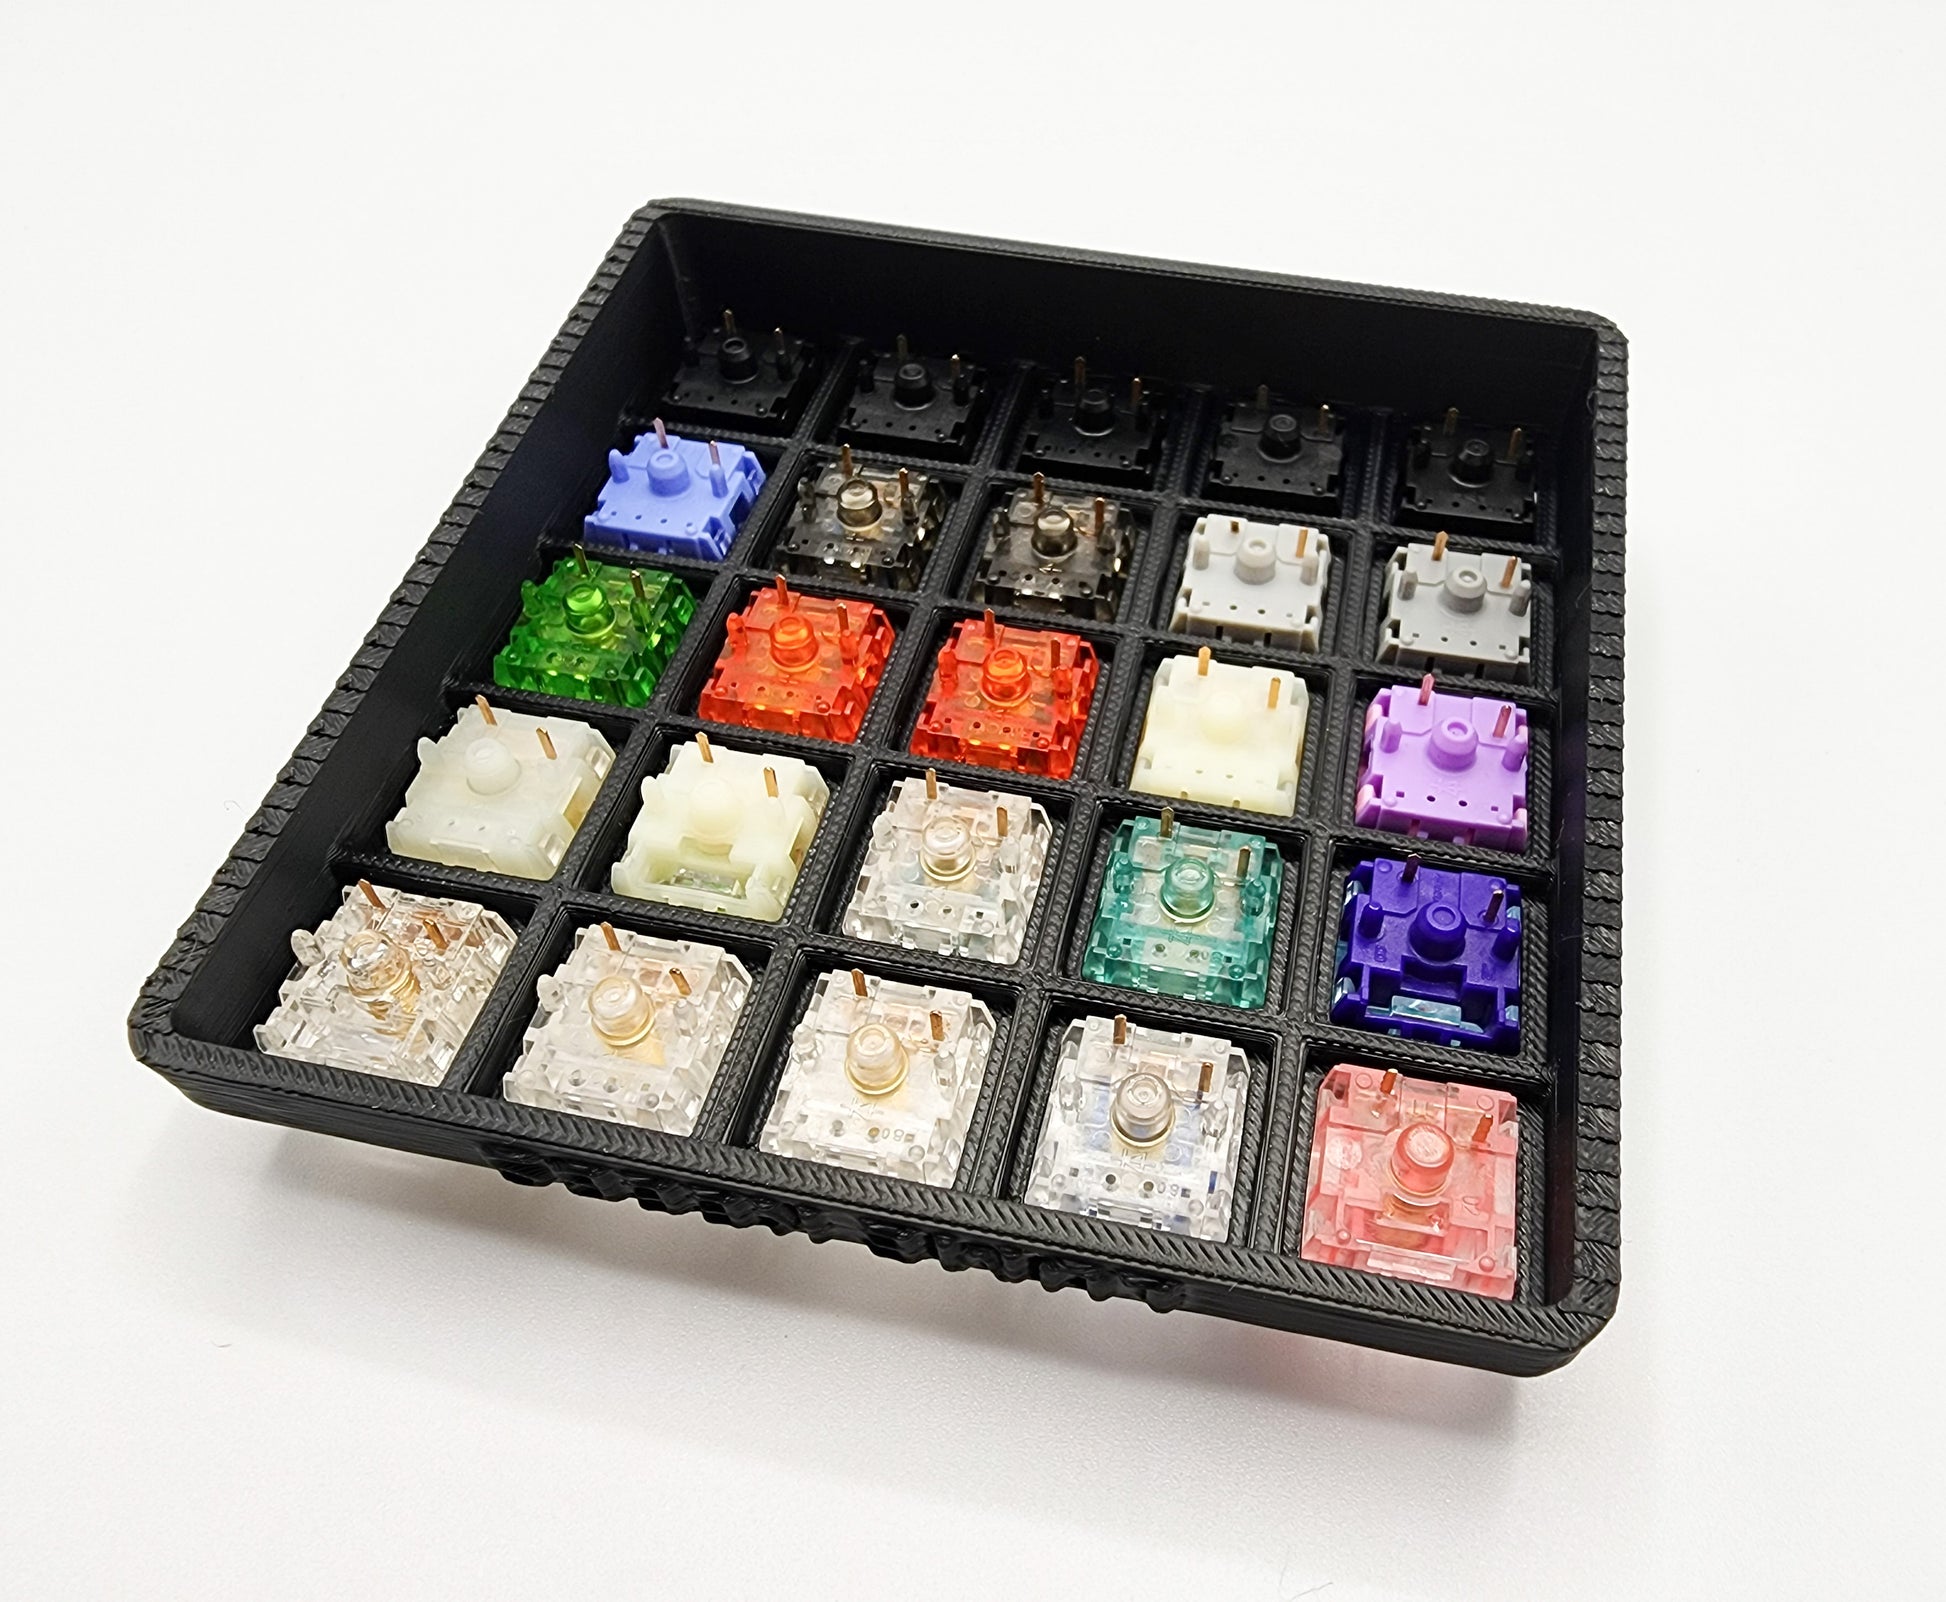 Mechanical Keyboard Switch Testers – Curious Tinkerings